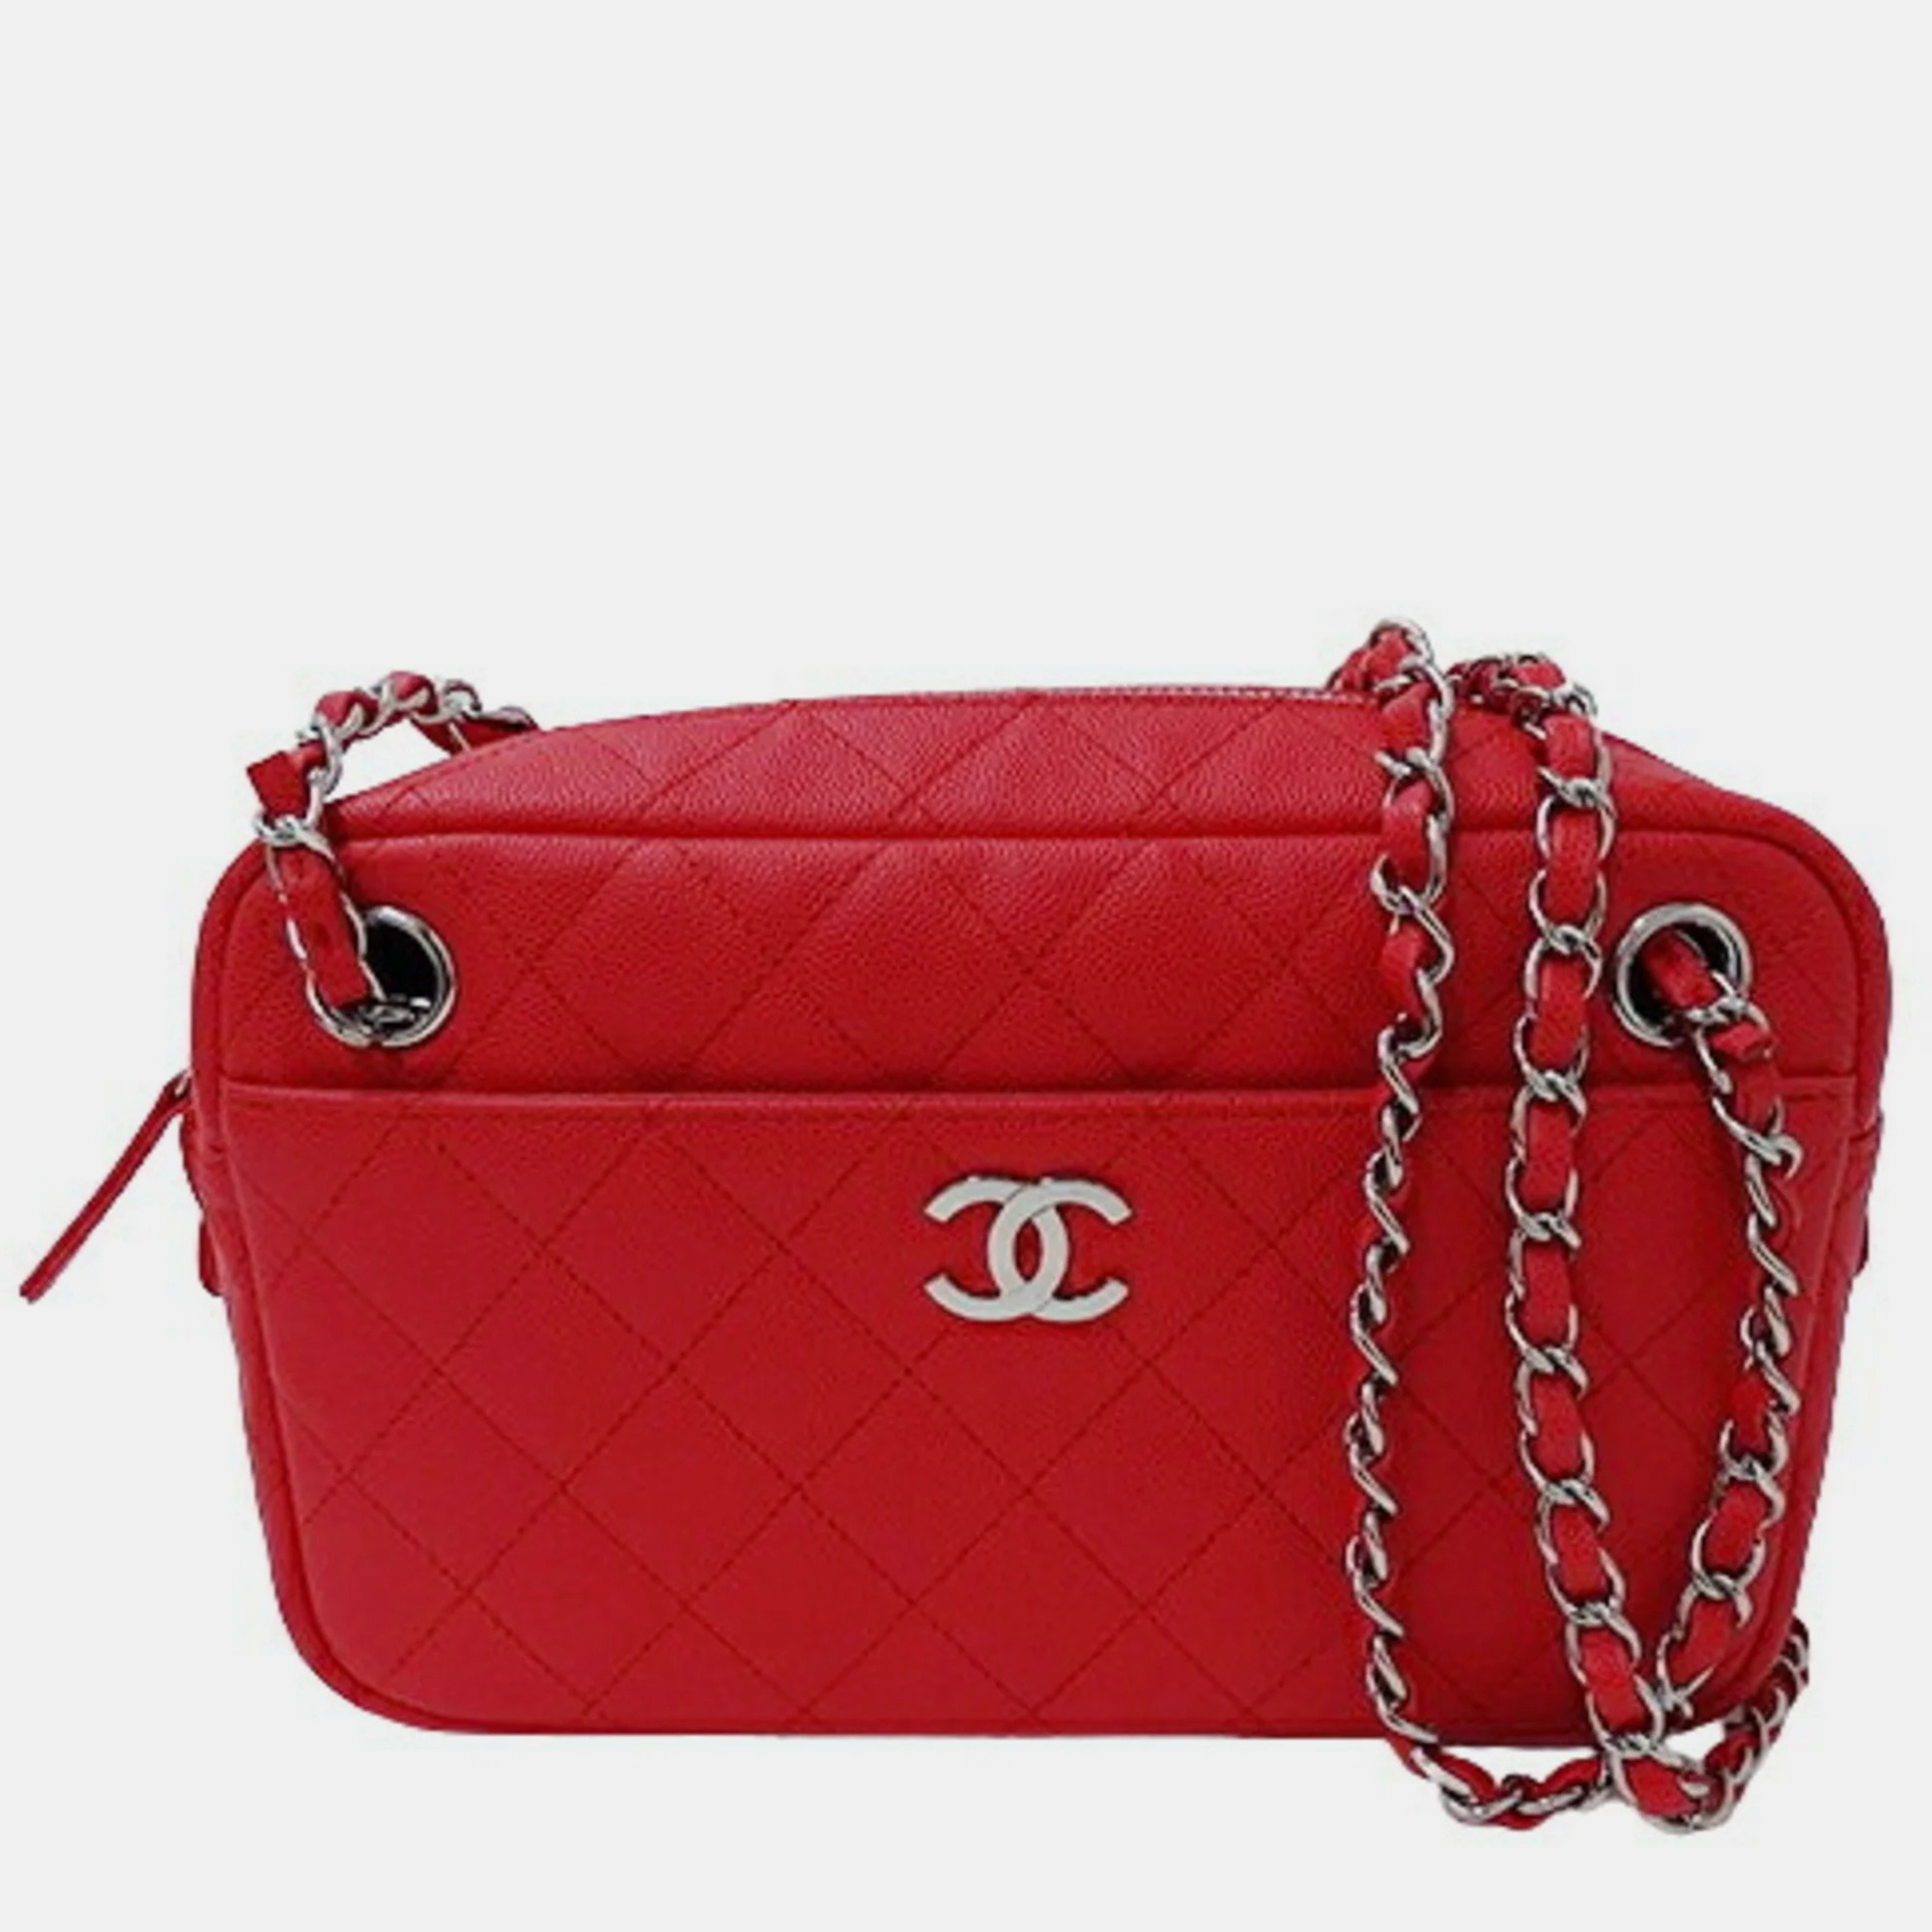 Pre-owned Chanel Red Caviar Leather Casual Trip Camera Bag